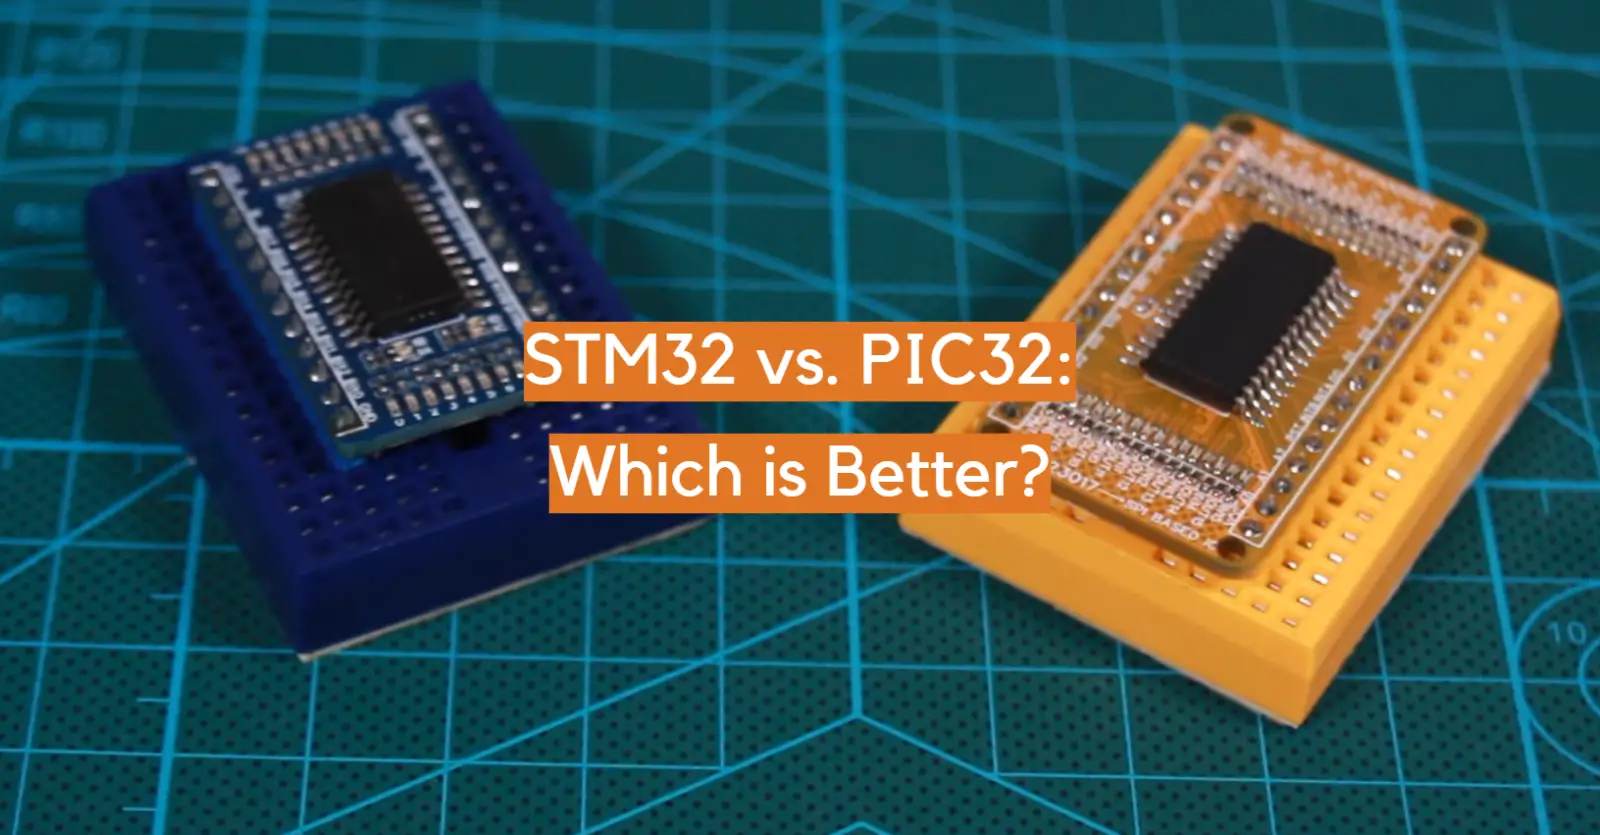 STM32 vs. PIC32: Which is Better?